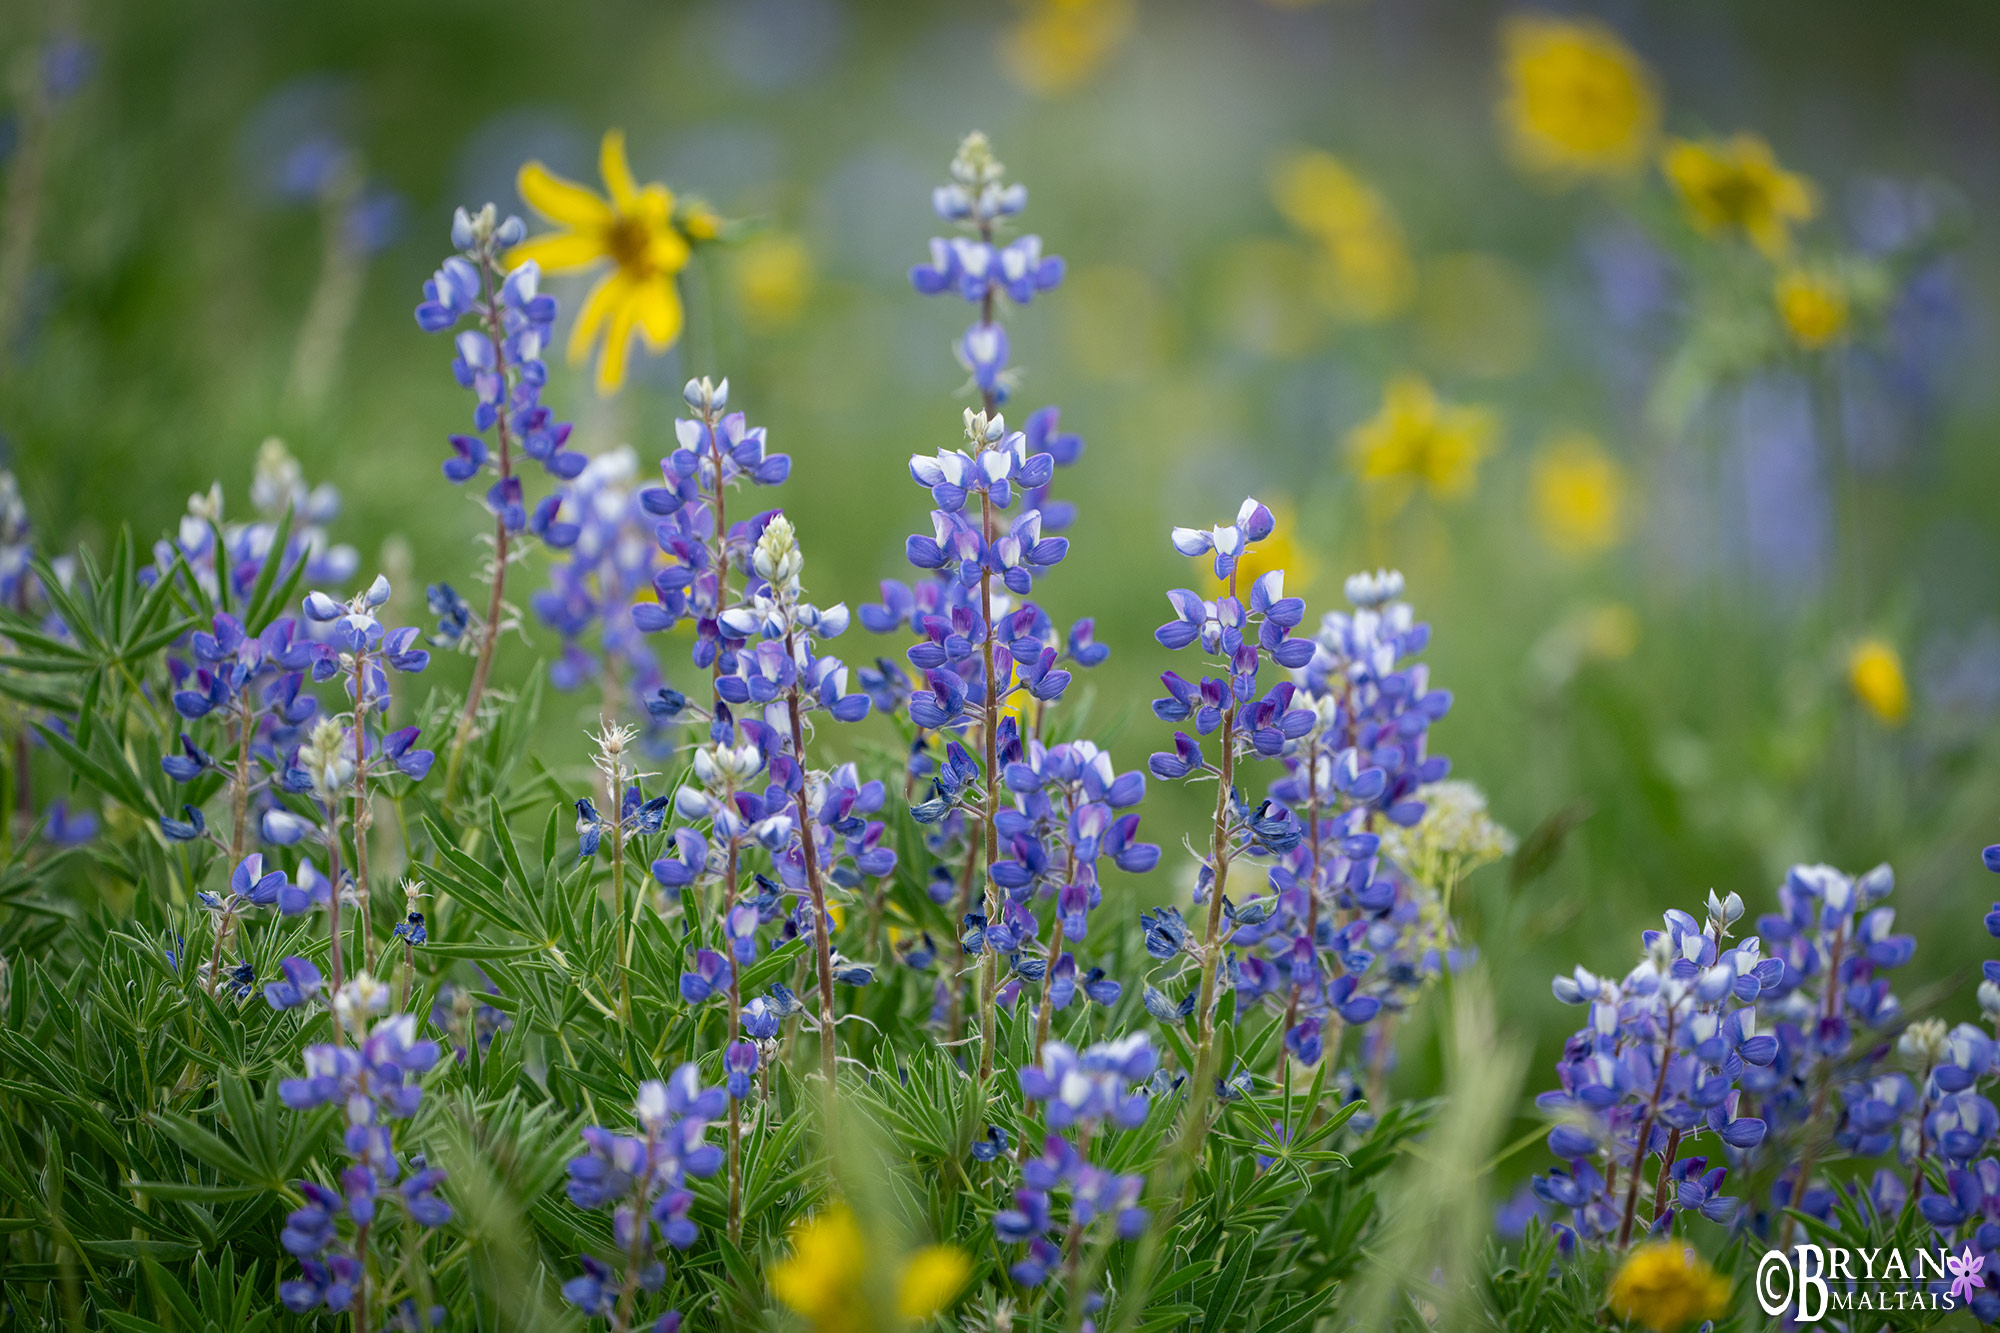 crested butte wildflowers lupine photo prints